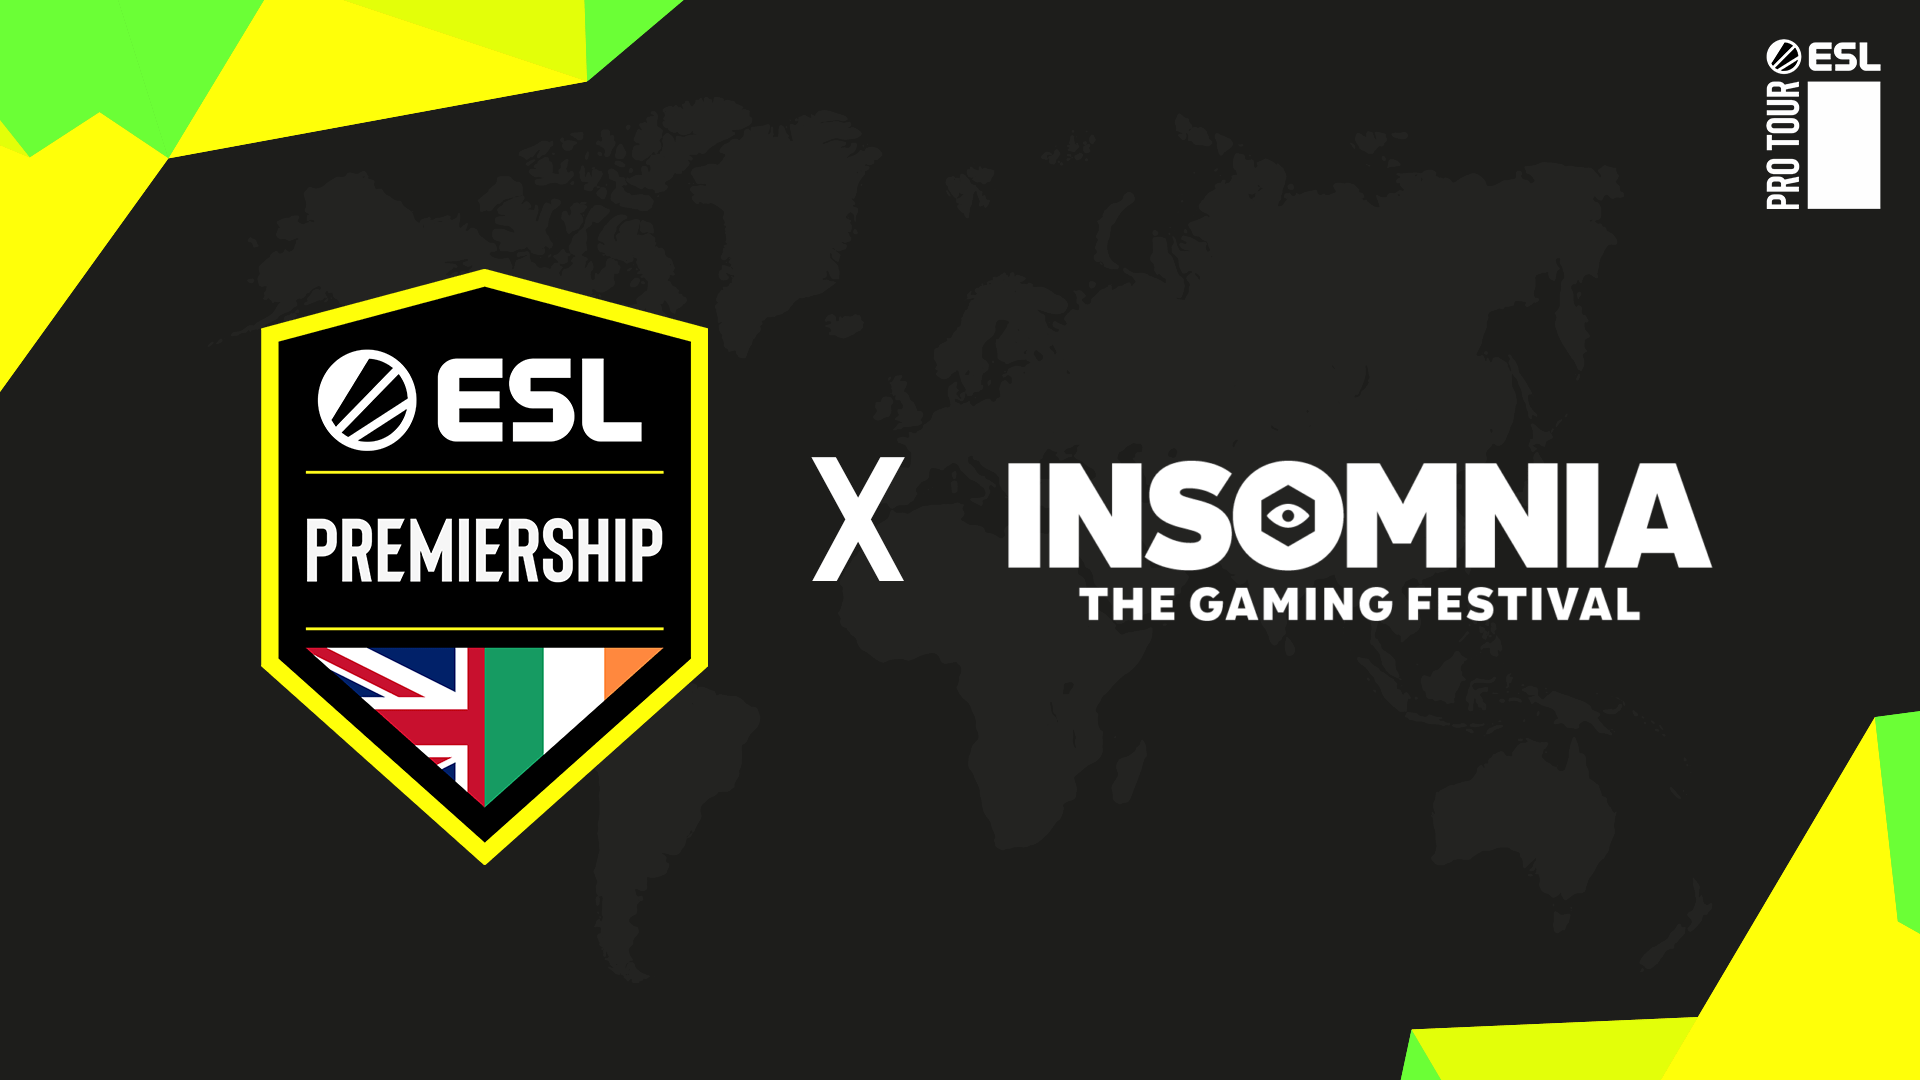 ESL Premiership is coming to Insomnia the Gaming Festival to bring Counter-Strike to the biggest stage in UK esports in the last 5 years!